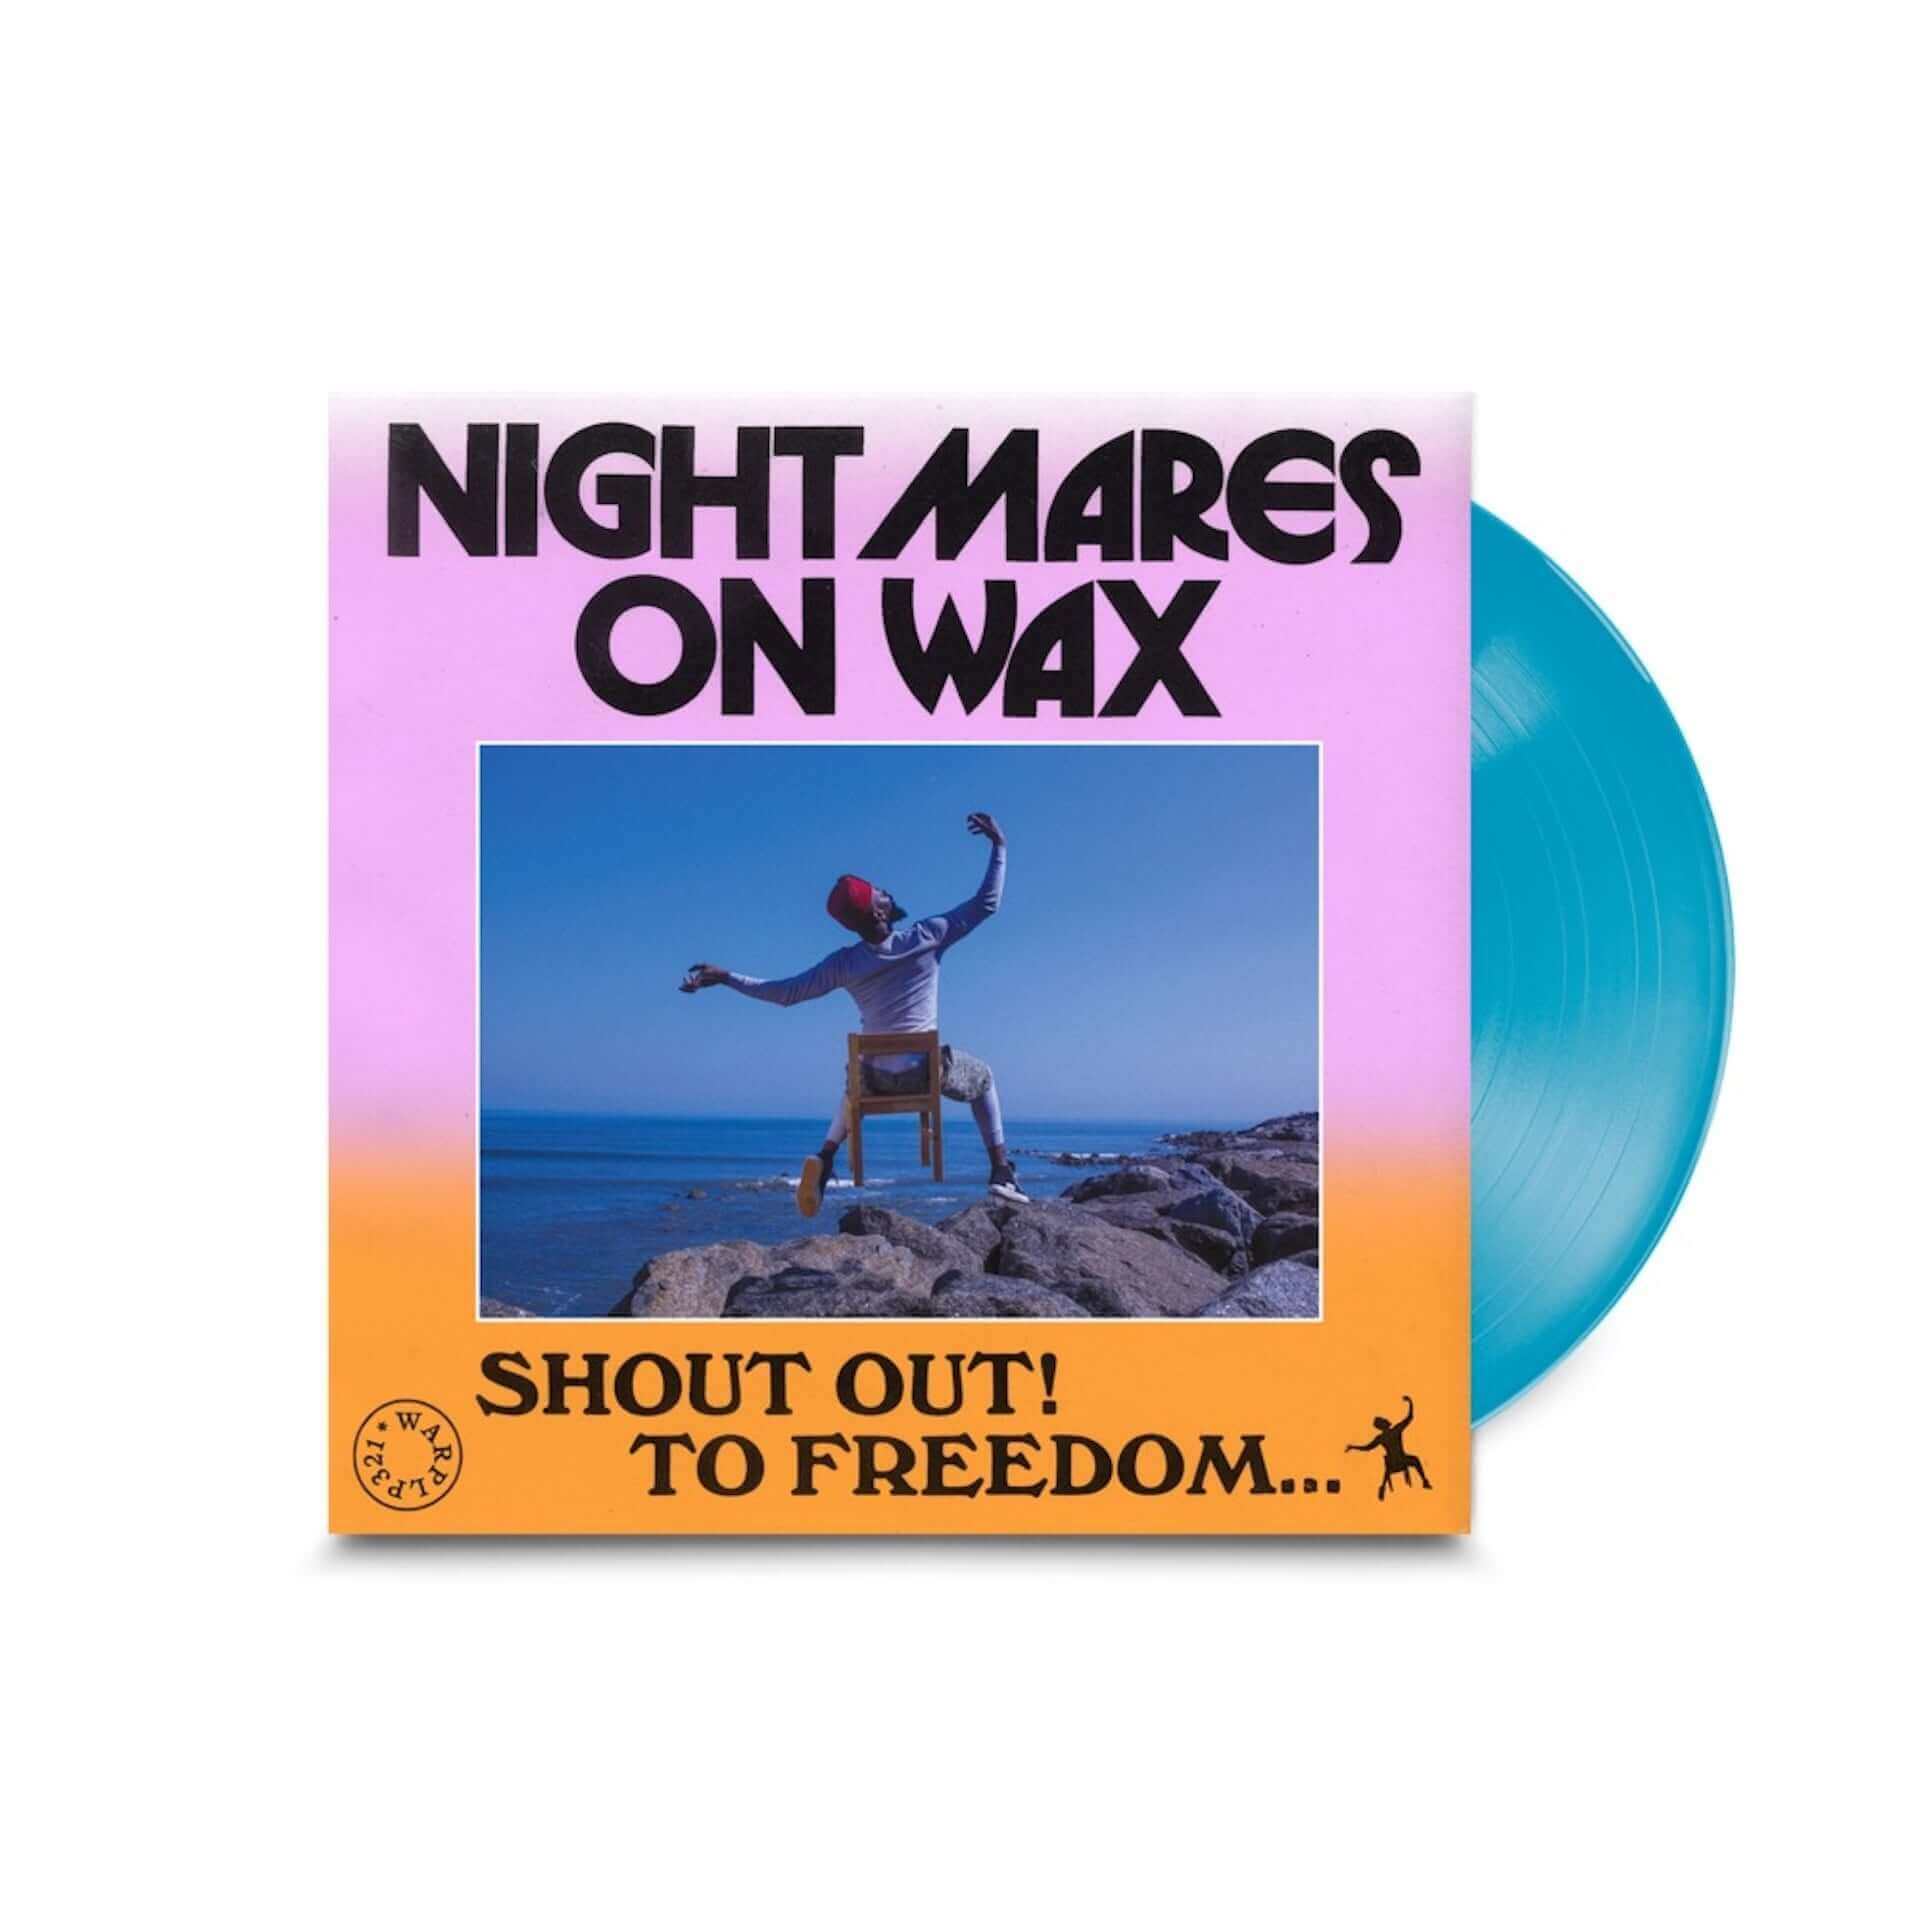 Nightmares On Waxの最新アルバム『SHOUT OUT！ TO FREEDOM…』から新曲“BREATHE IN”が解禁！ music211007_nightmares_on_wax_04